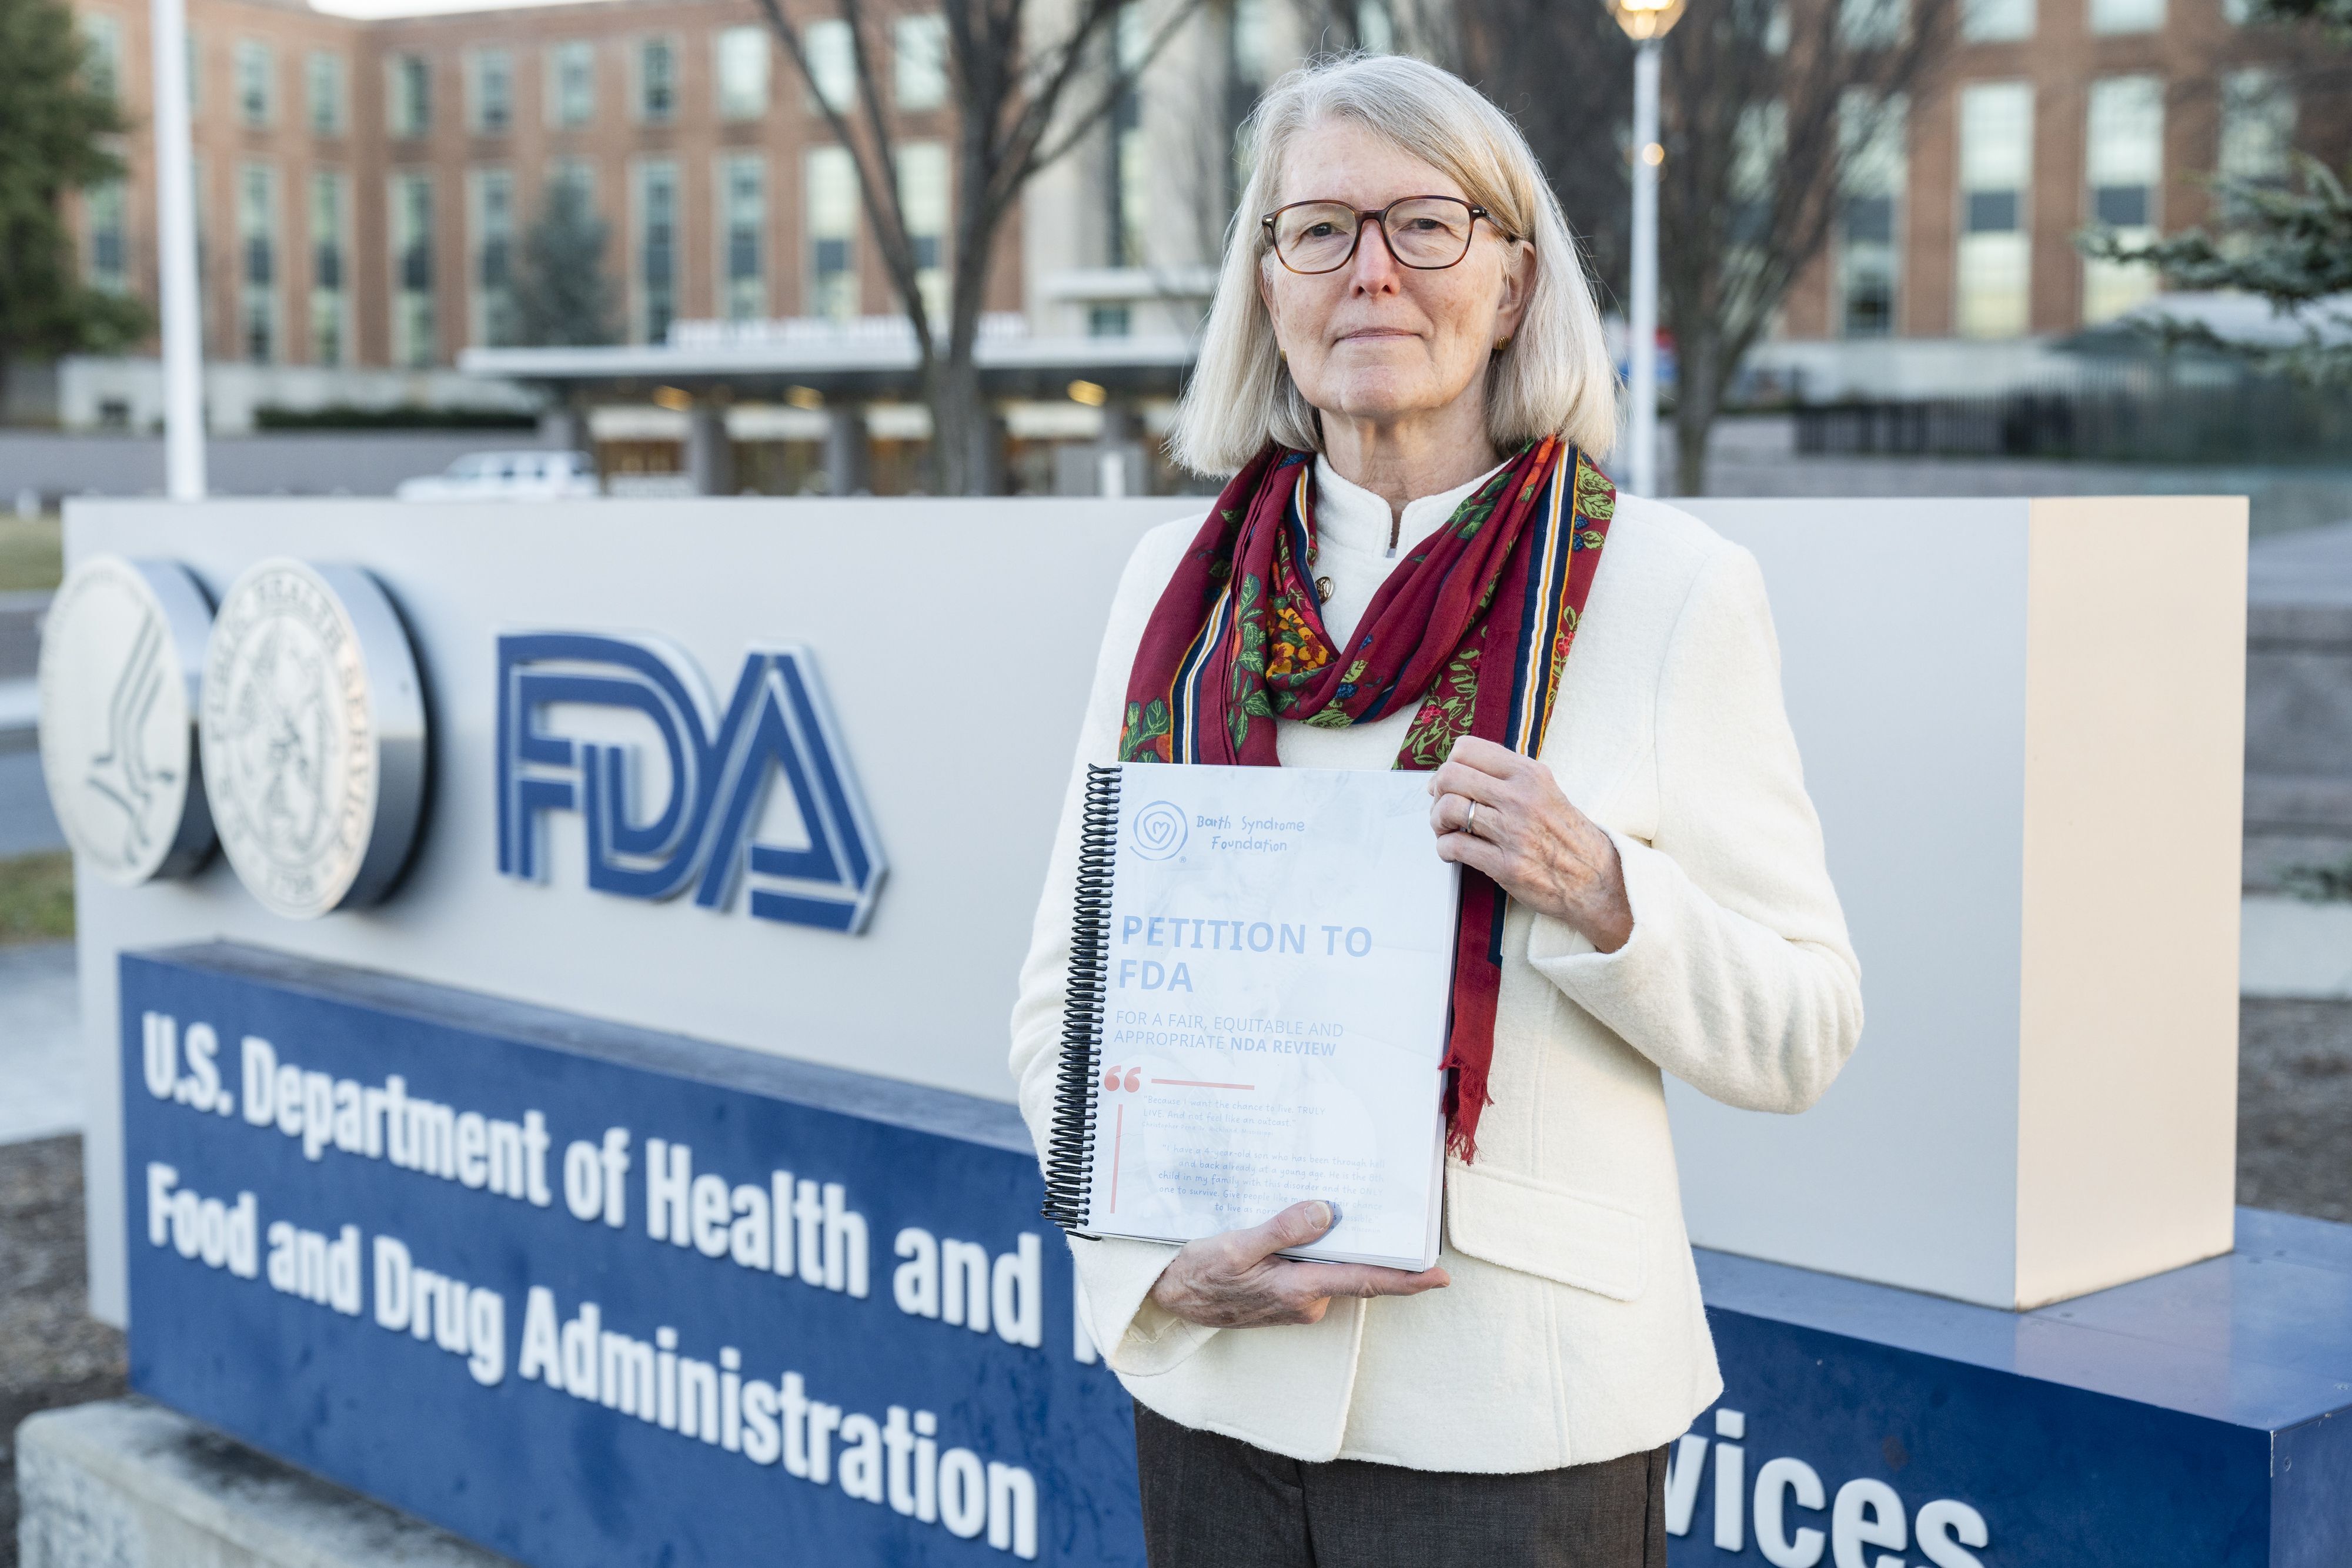 The Barth Syndrome Foundation Delivers Petition to FDA Advocating for a Fair, Equitable and Appropriate Review of the Only Potential Treatment for Barth Syndrome